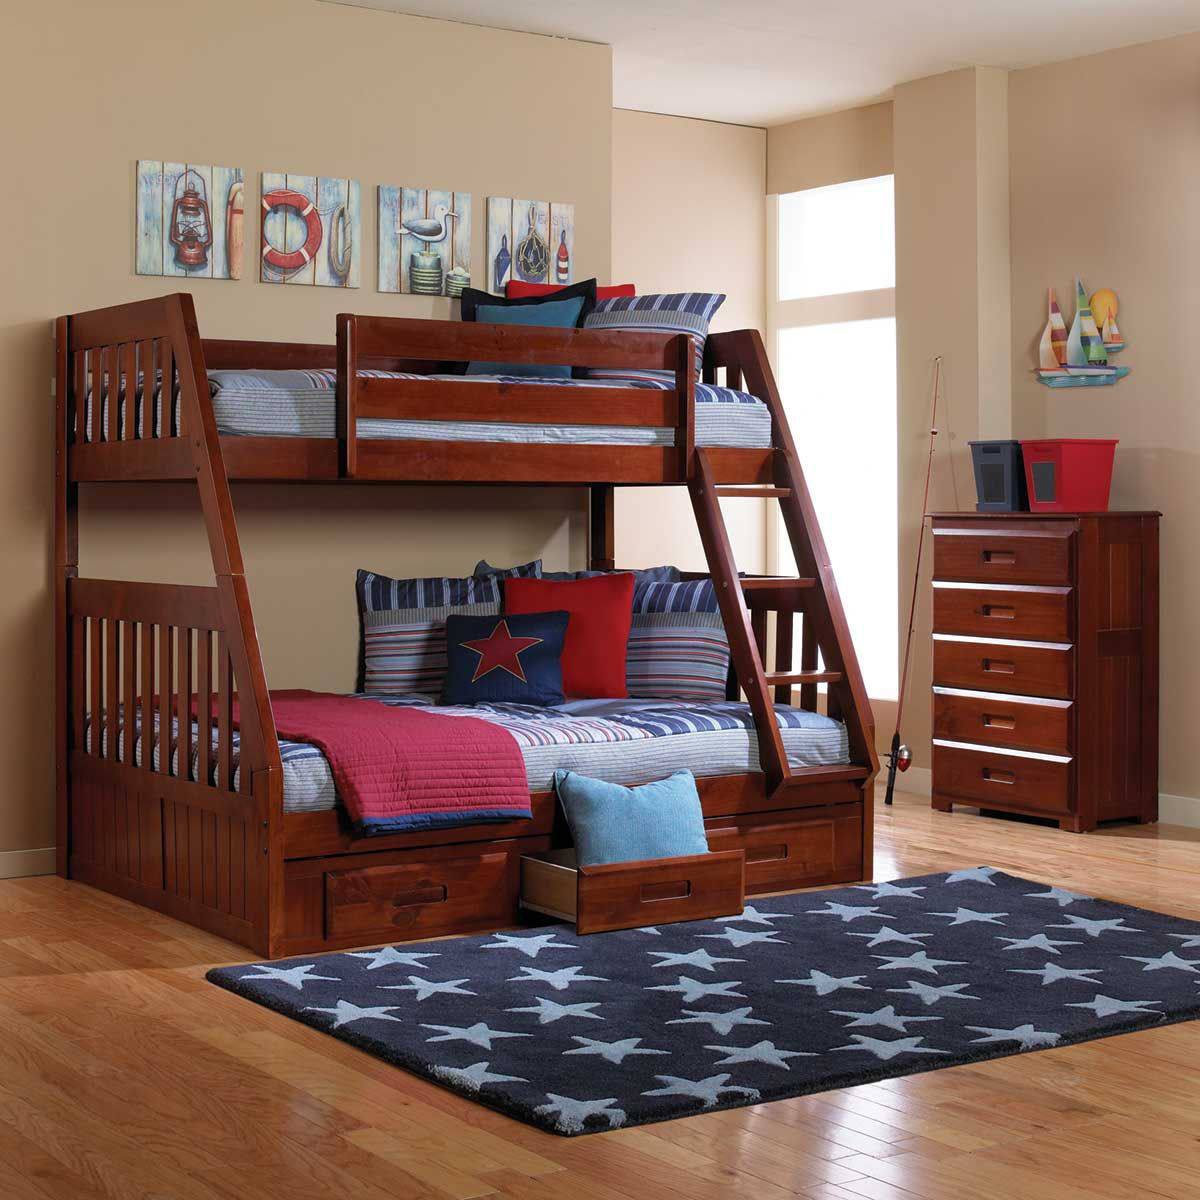 Forrester Twin Full Bunk Bed Bad, Twin Over Full Bunk Bed With Storage